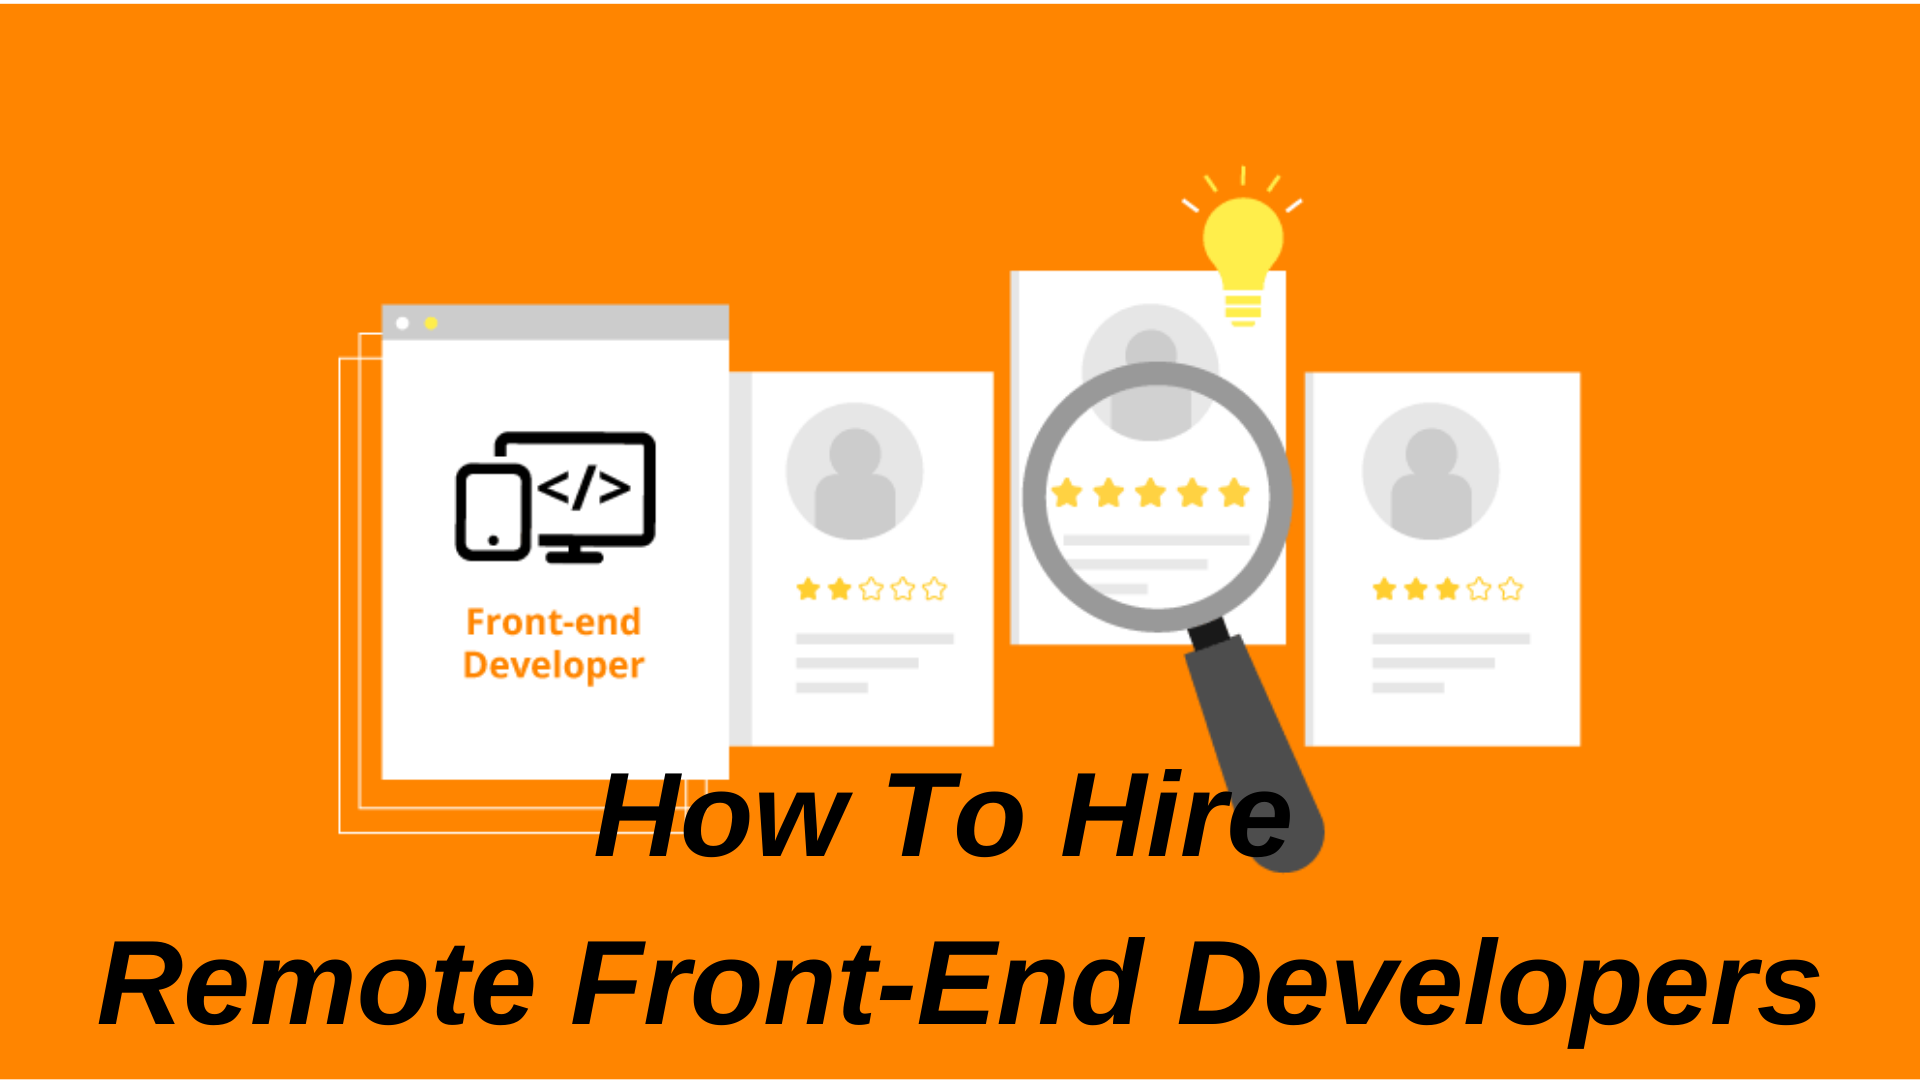 Hire remote front-end developers